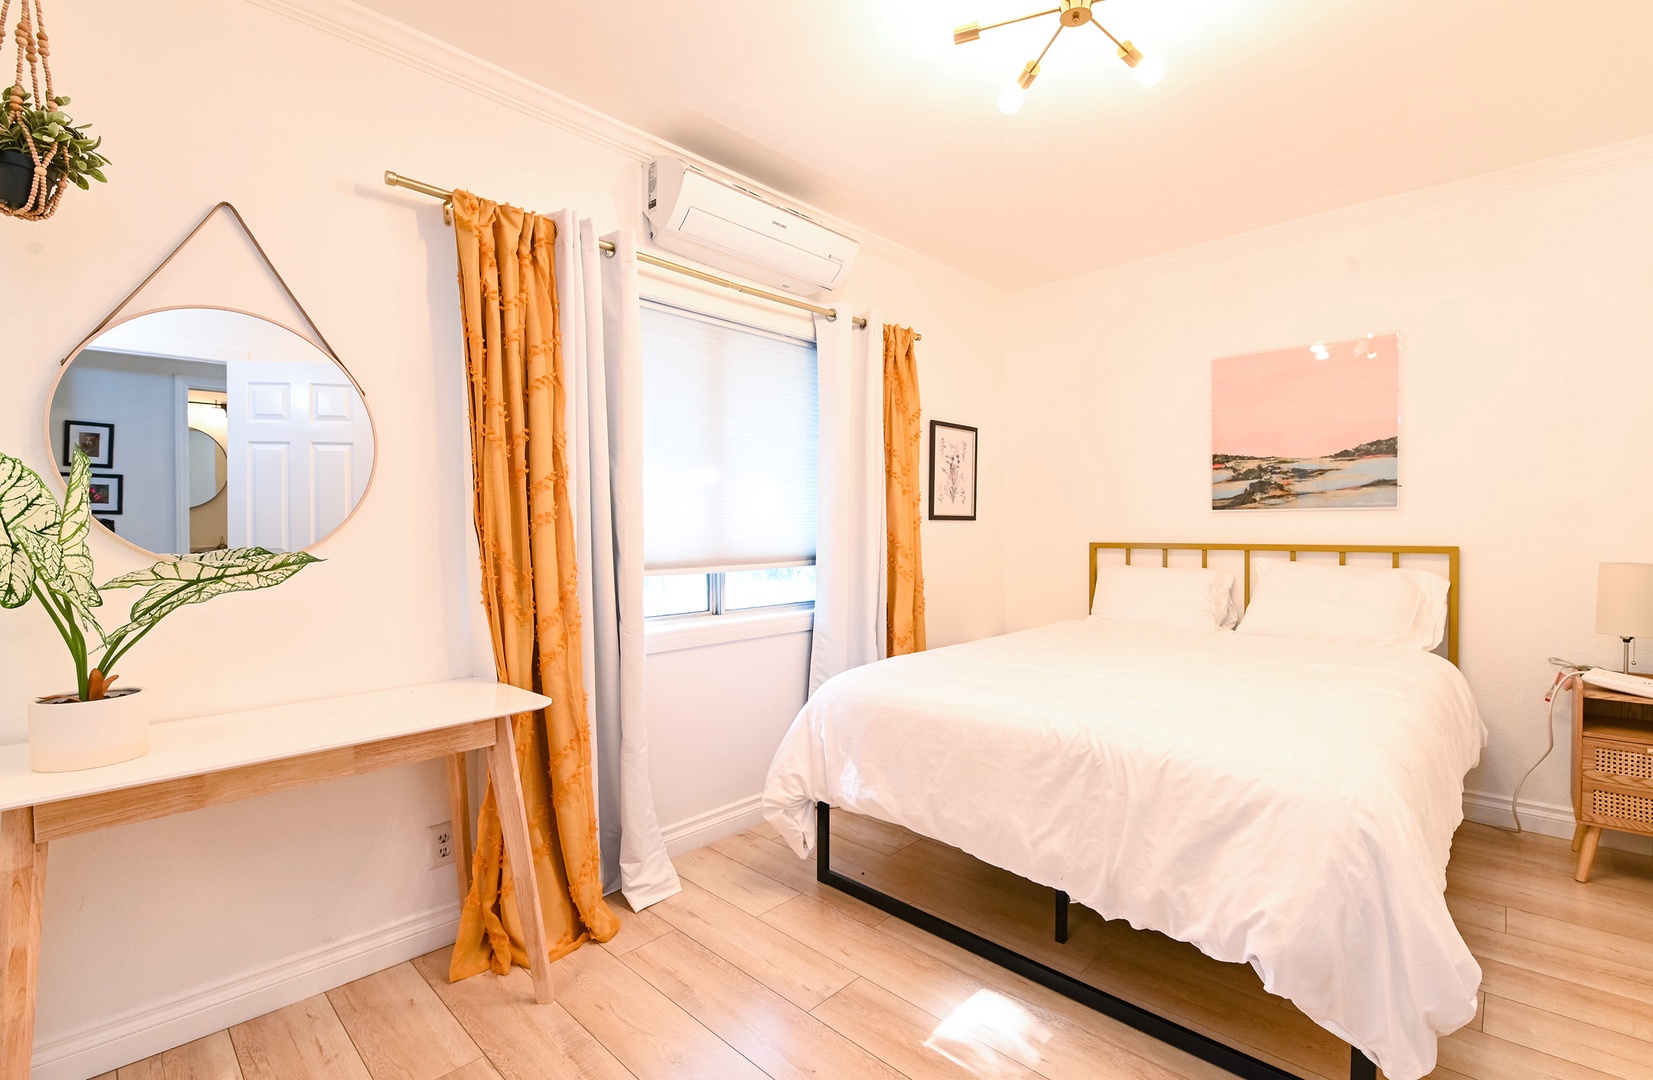 The queen bedroom offers a Smart TV & plenty of space to relax